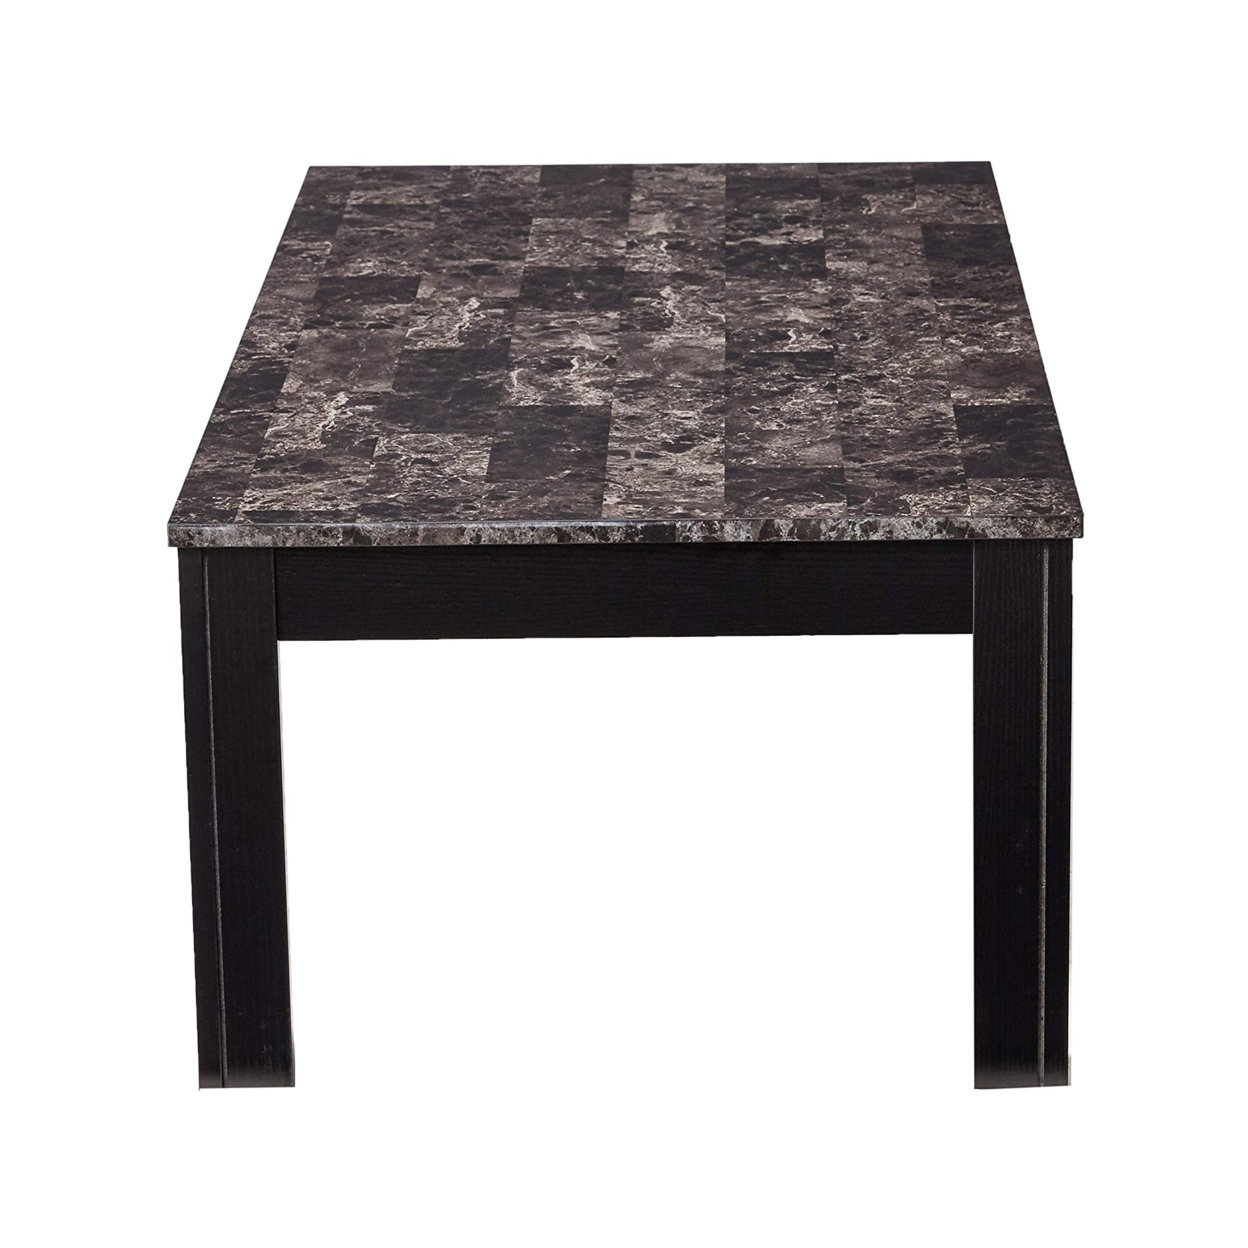 Impressive 3 Piece Occasional Table Set With Marble Top, Black- Saltoro Sherpi